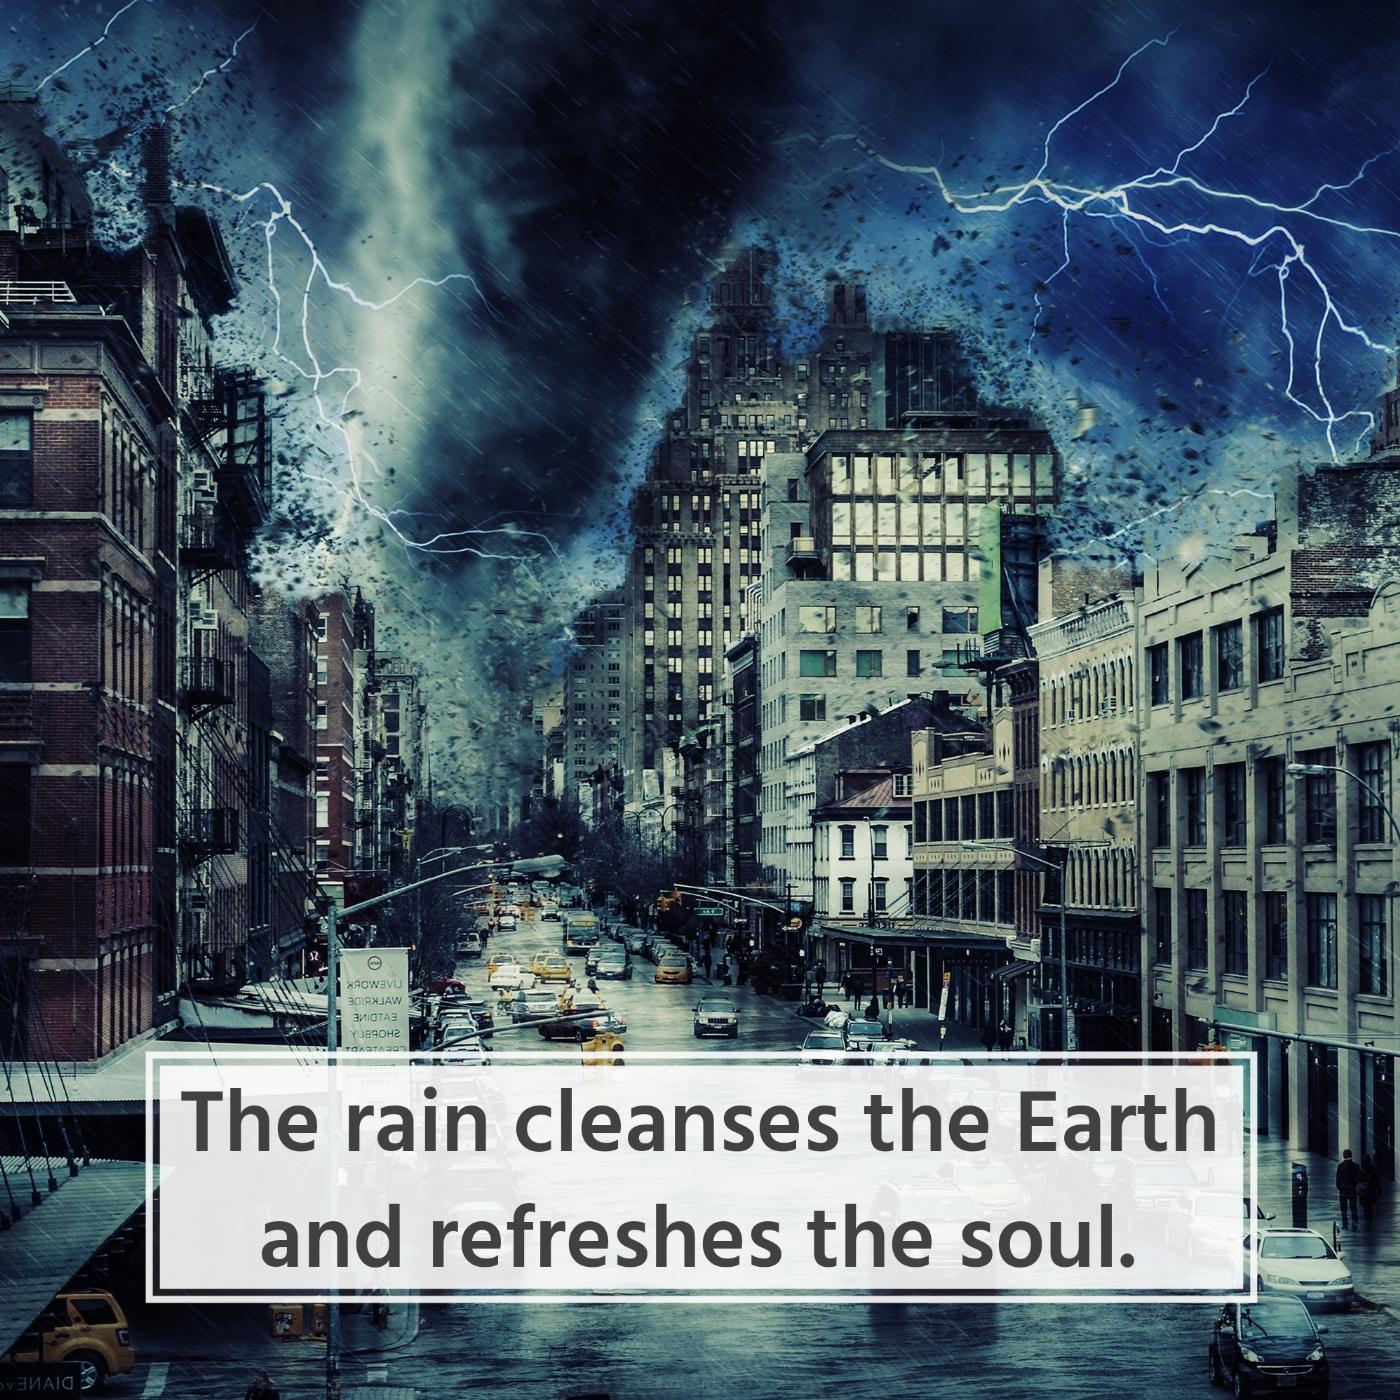 The rain cleanses the Earth and refreshes the soul